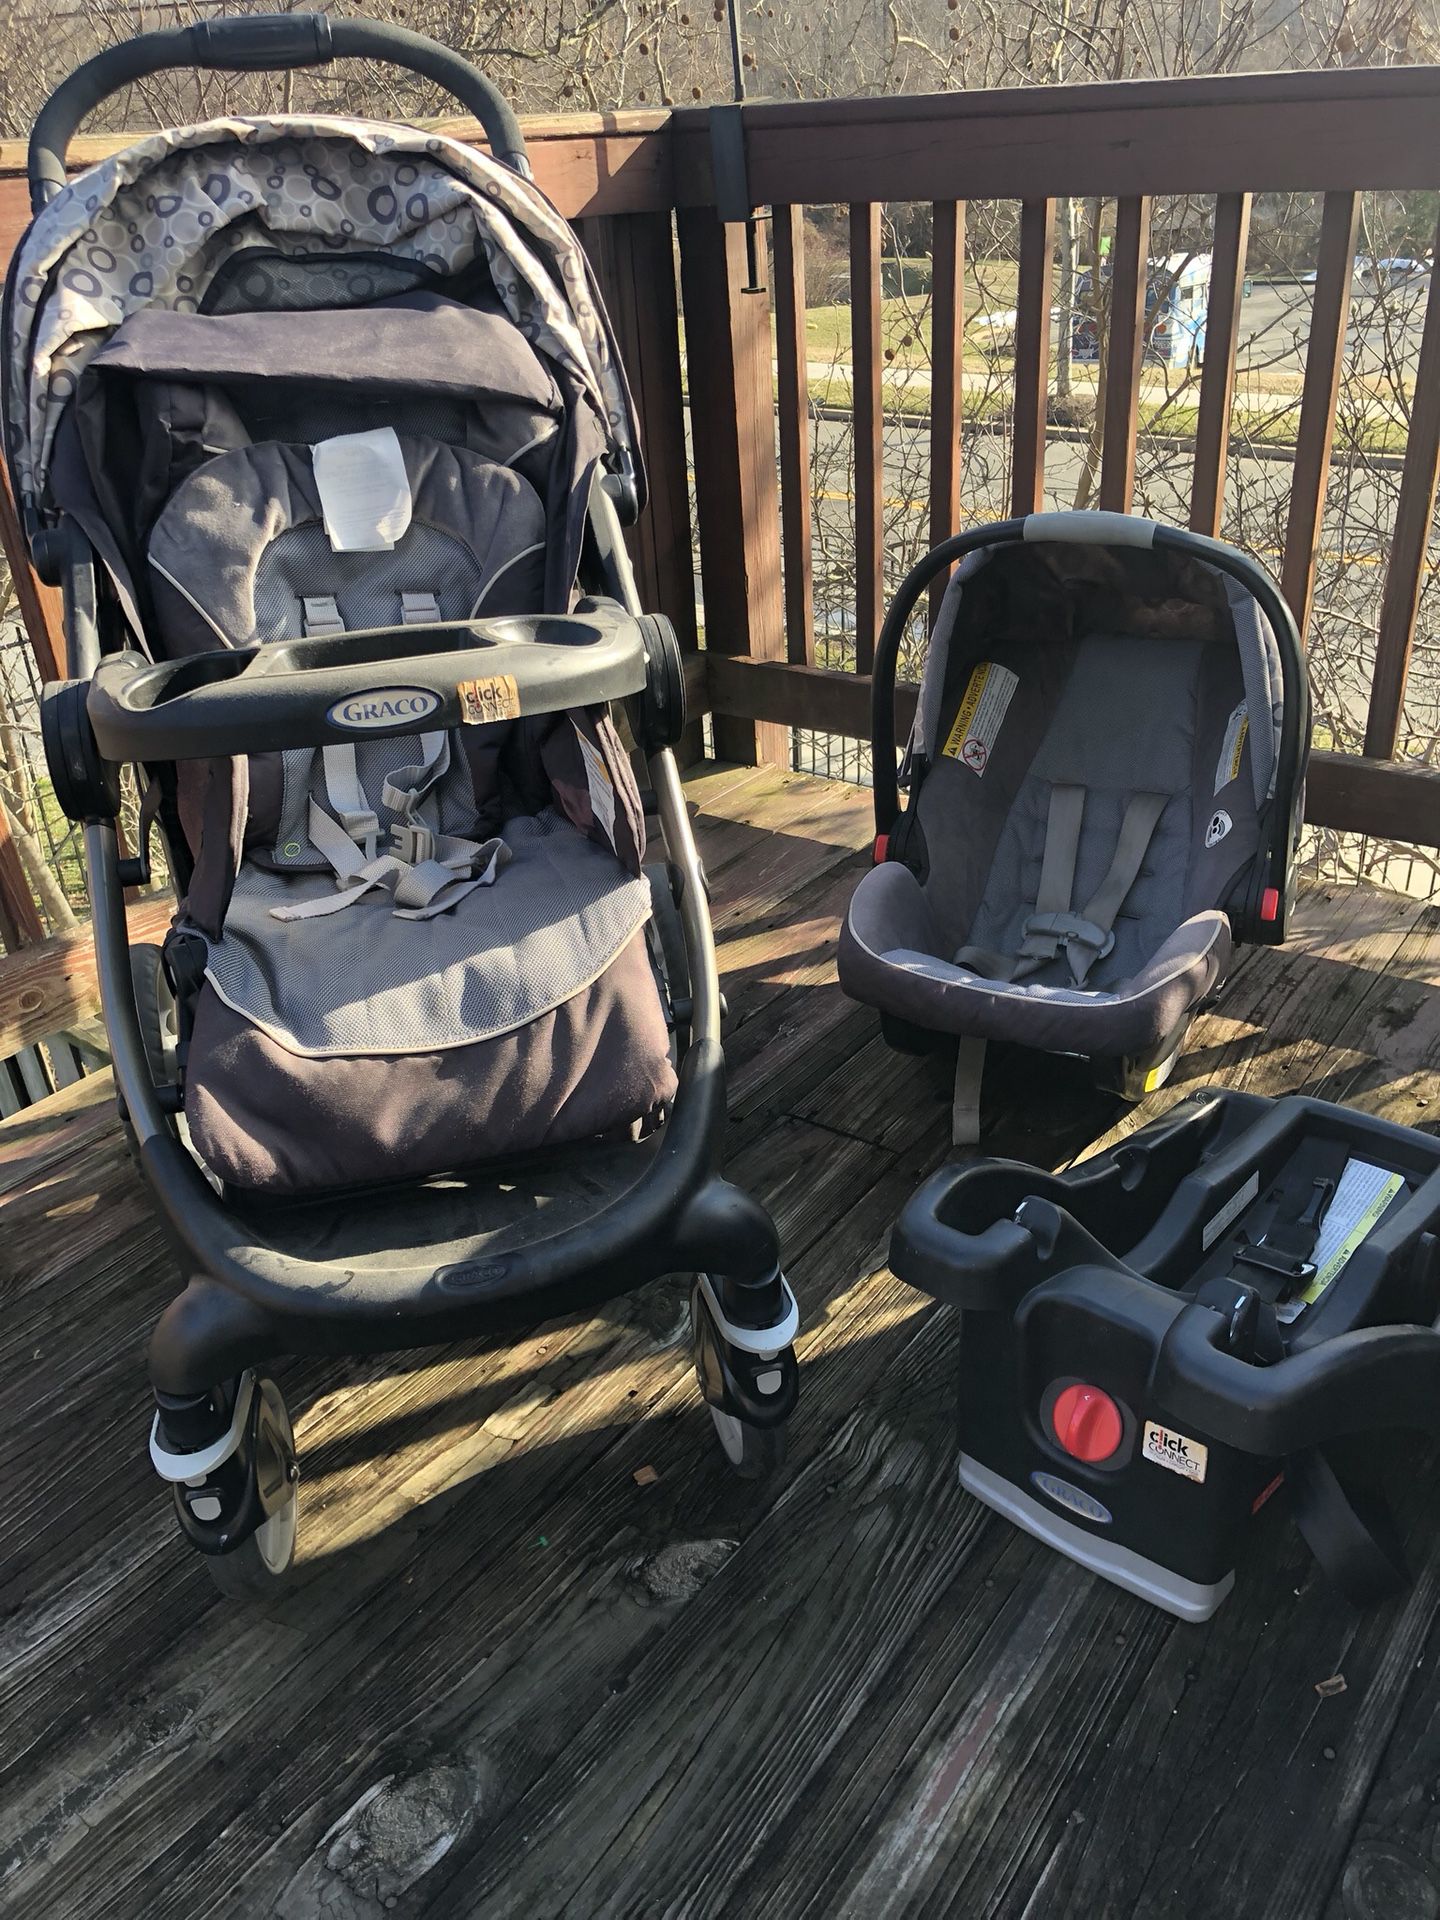 Graco Car Seat and Stroller Snug Ride Click Connect Travel System (PRICE NEGOTIABLE)